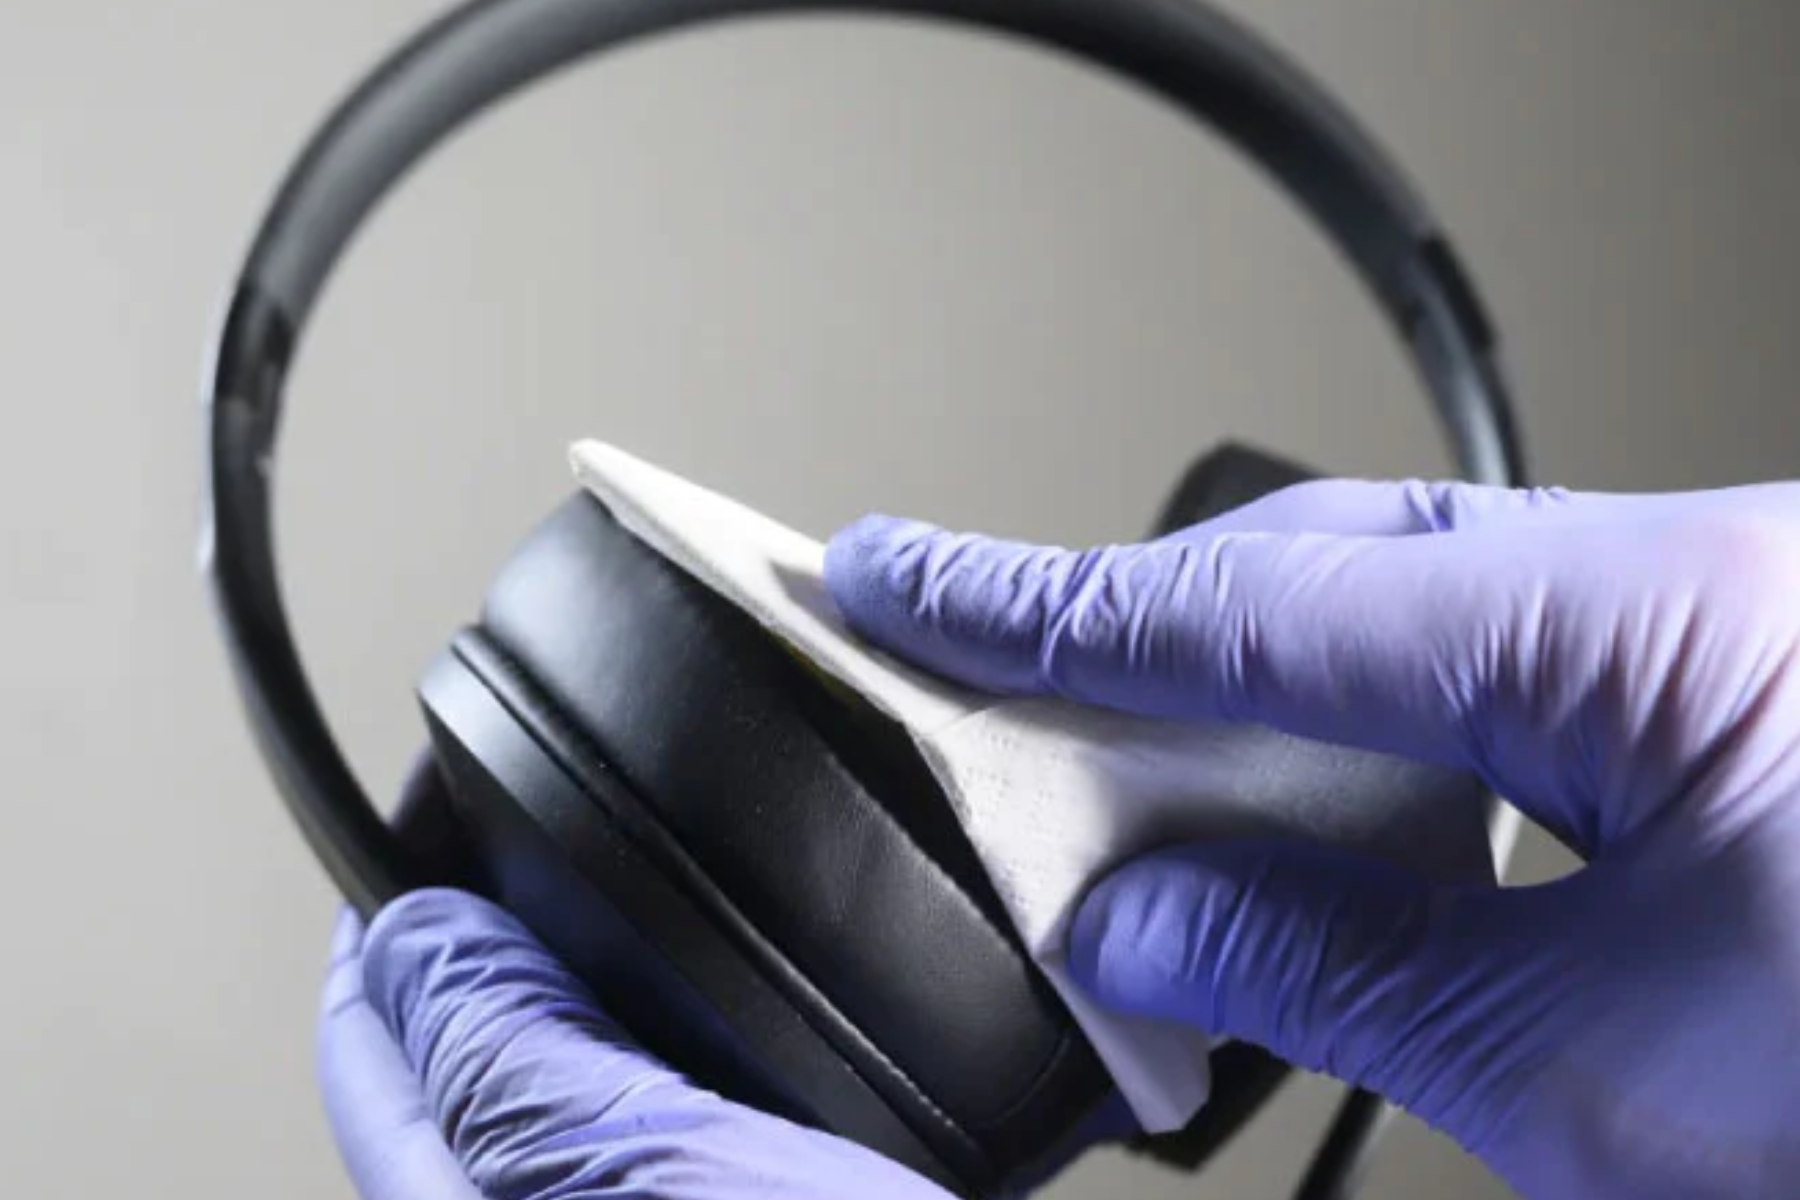 A pair of gloved hands using a tissue to clean a black headphone